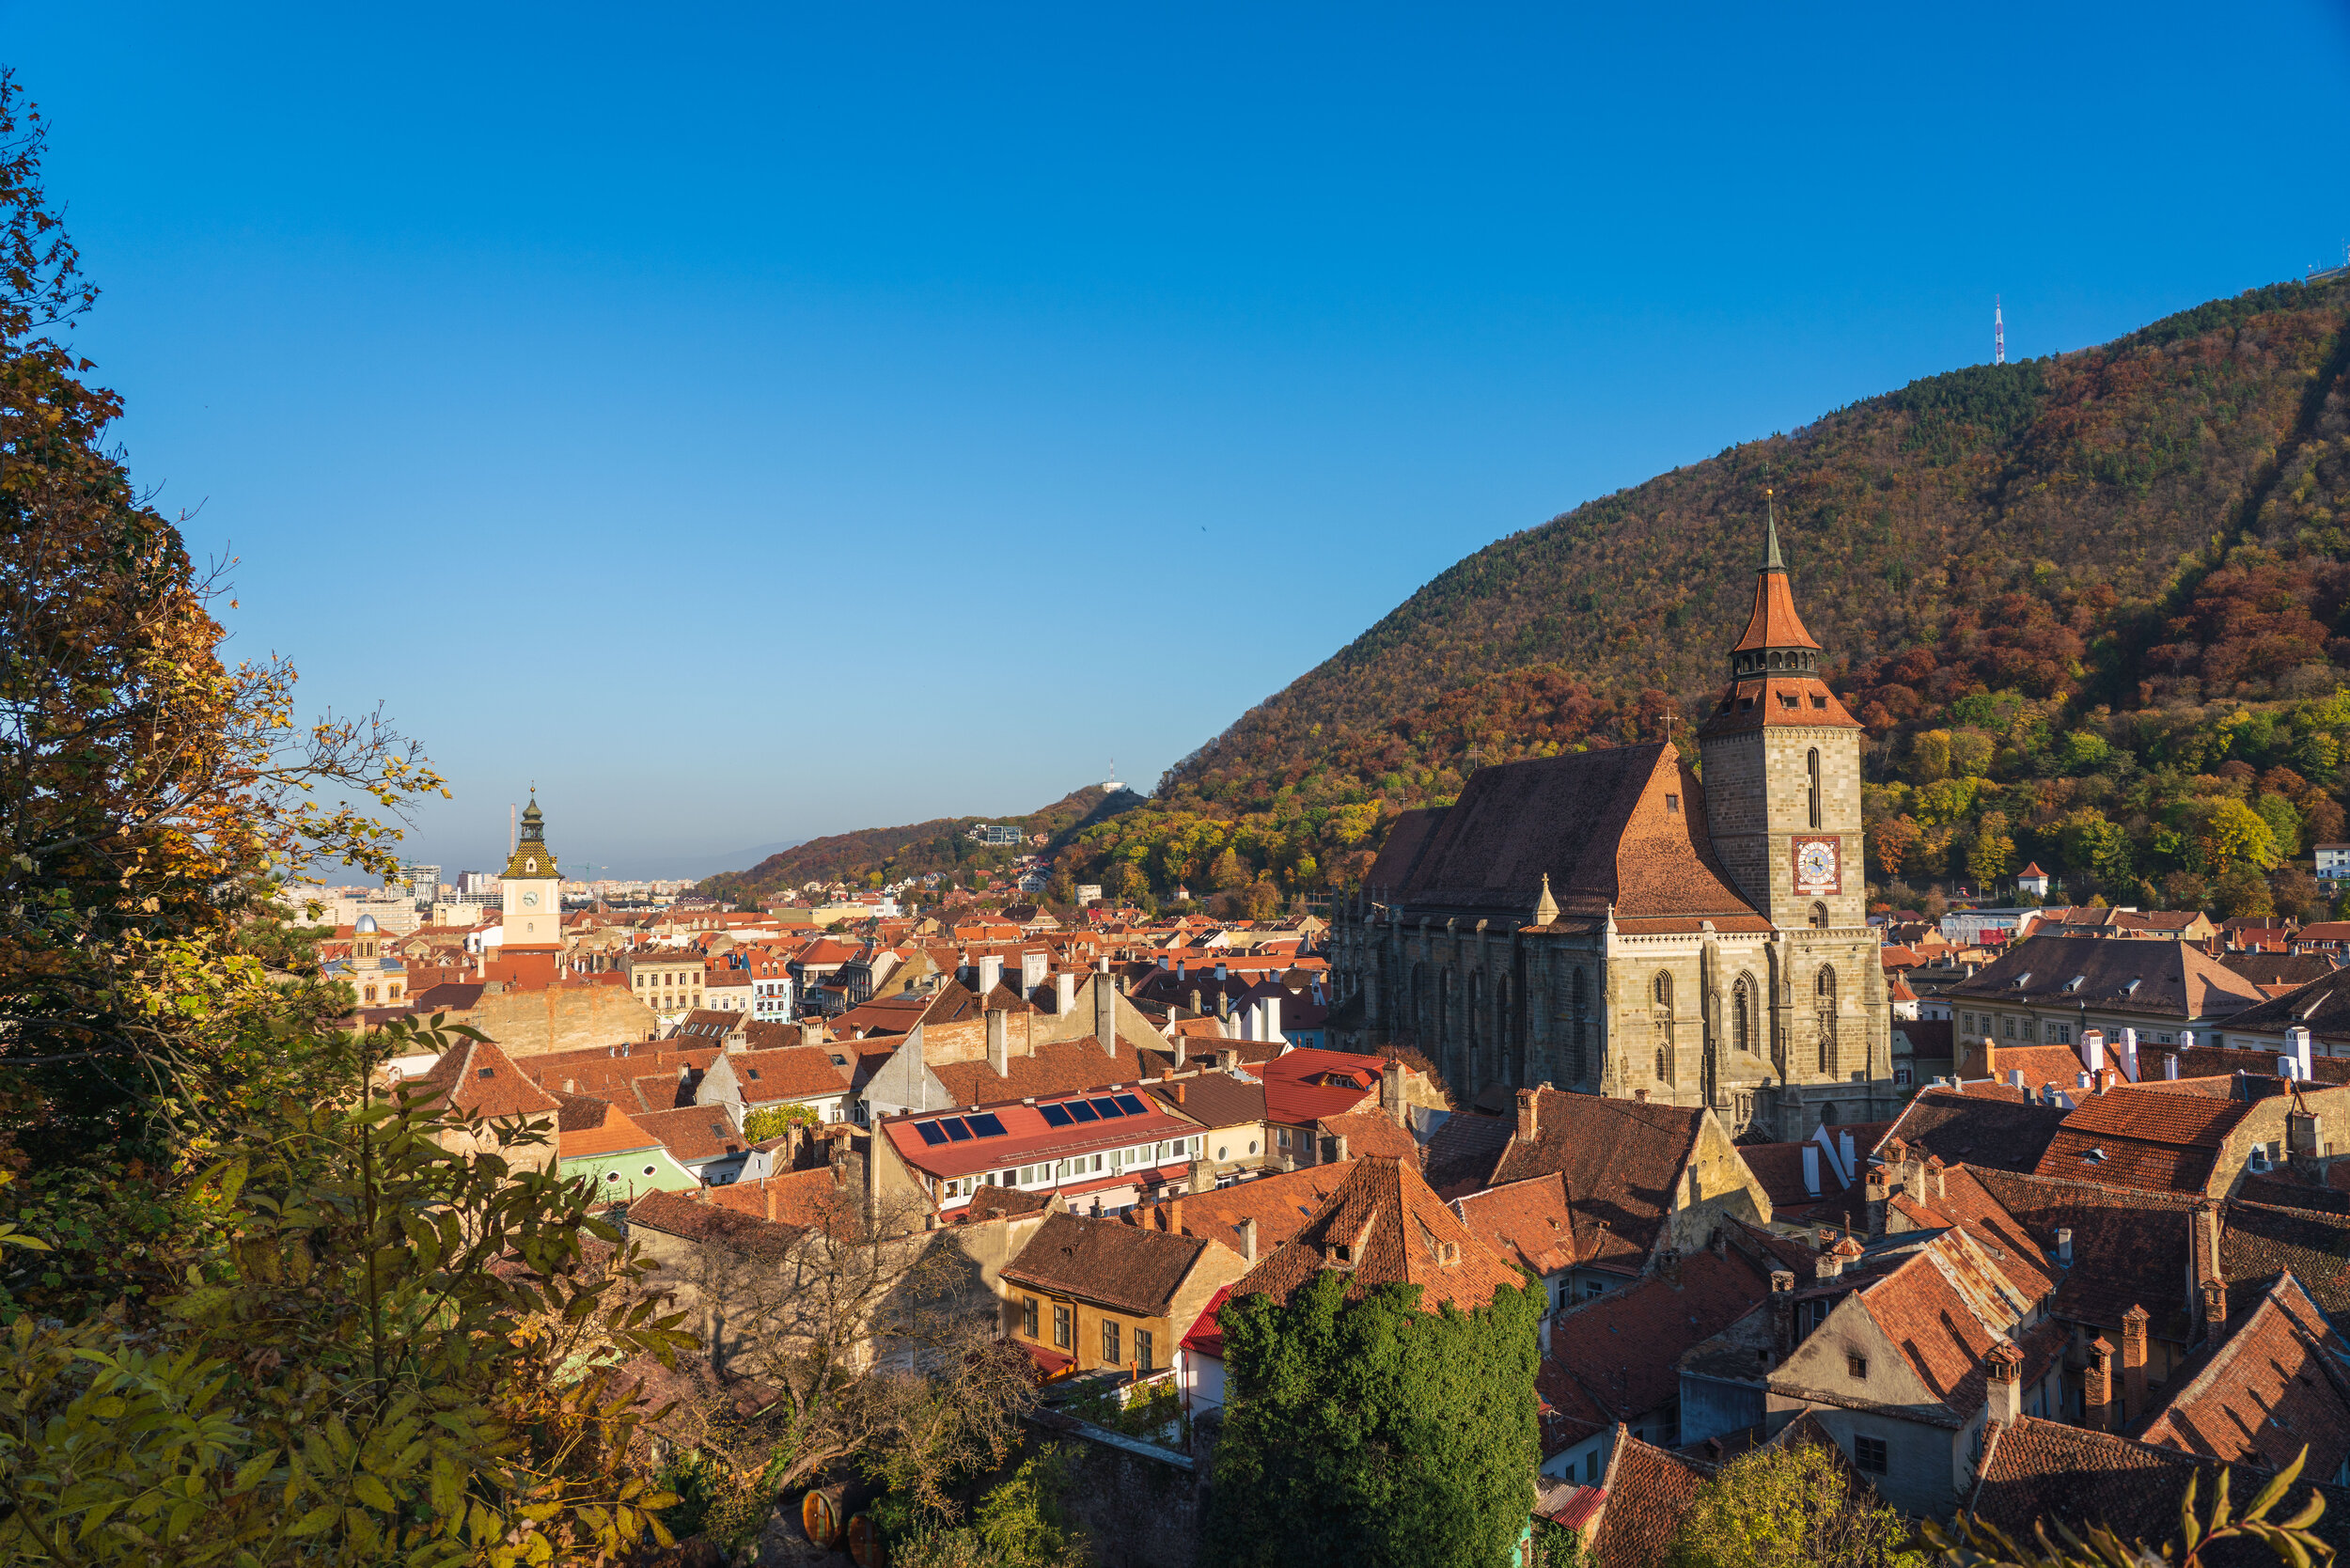  The town of Brasov, Romania which sits nestled into the Carpathian Mountains. I visited my friend Jules here and she showed me the city and some of its history. 